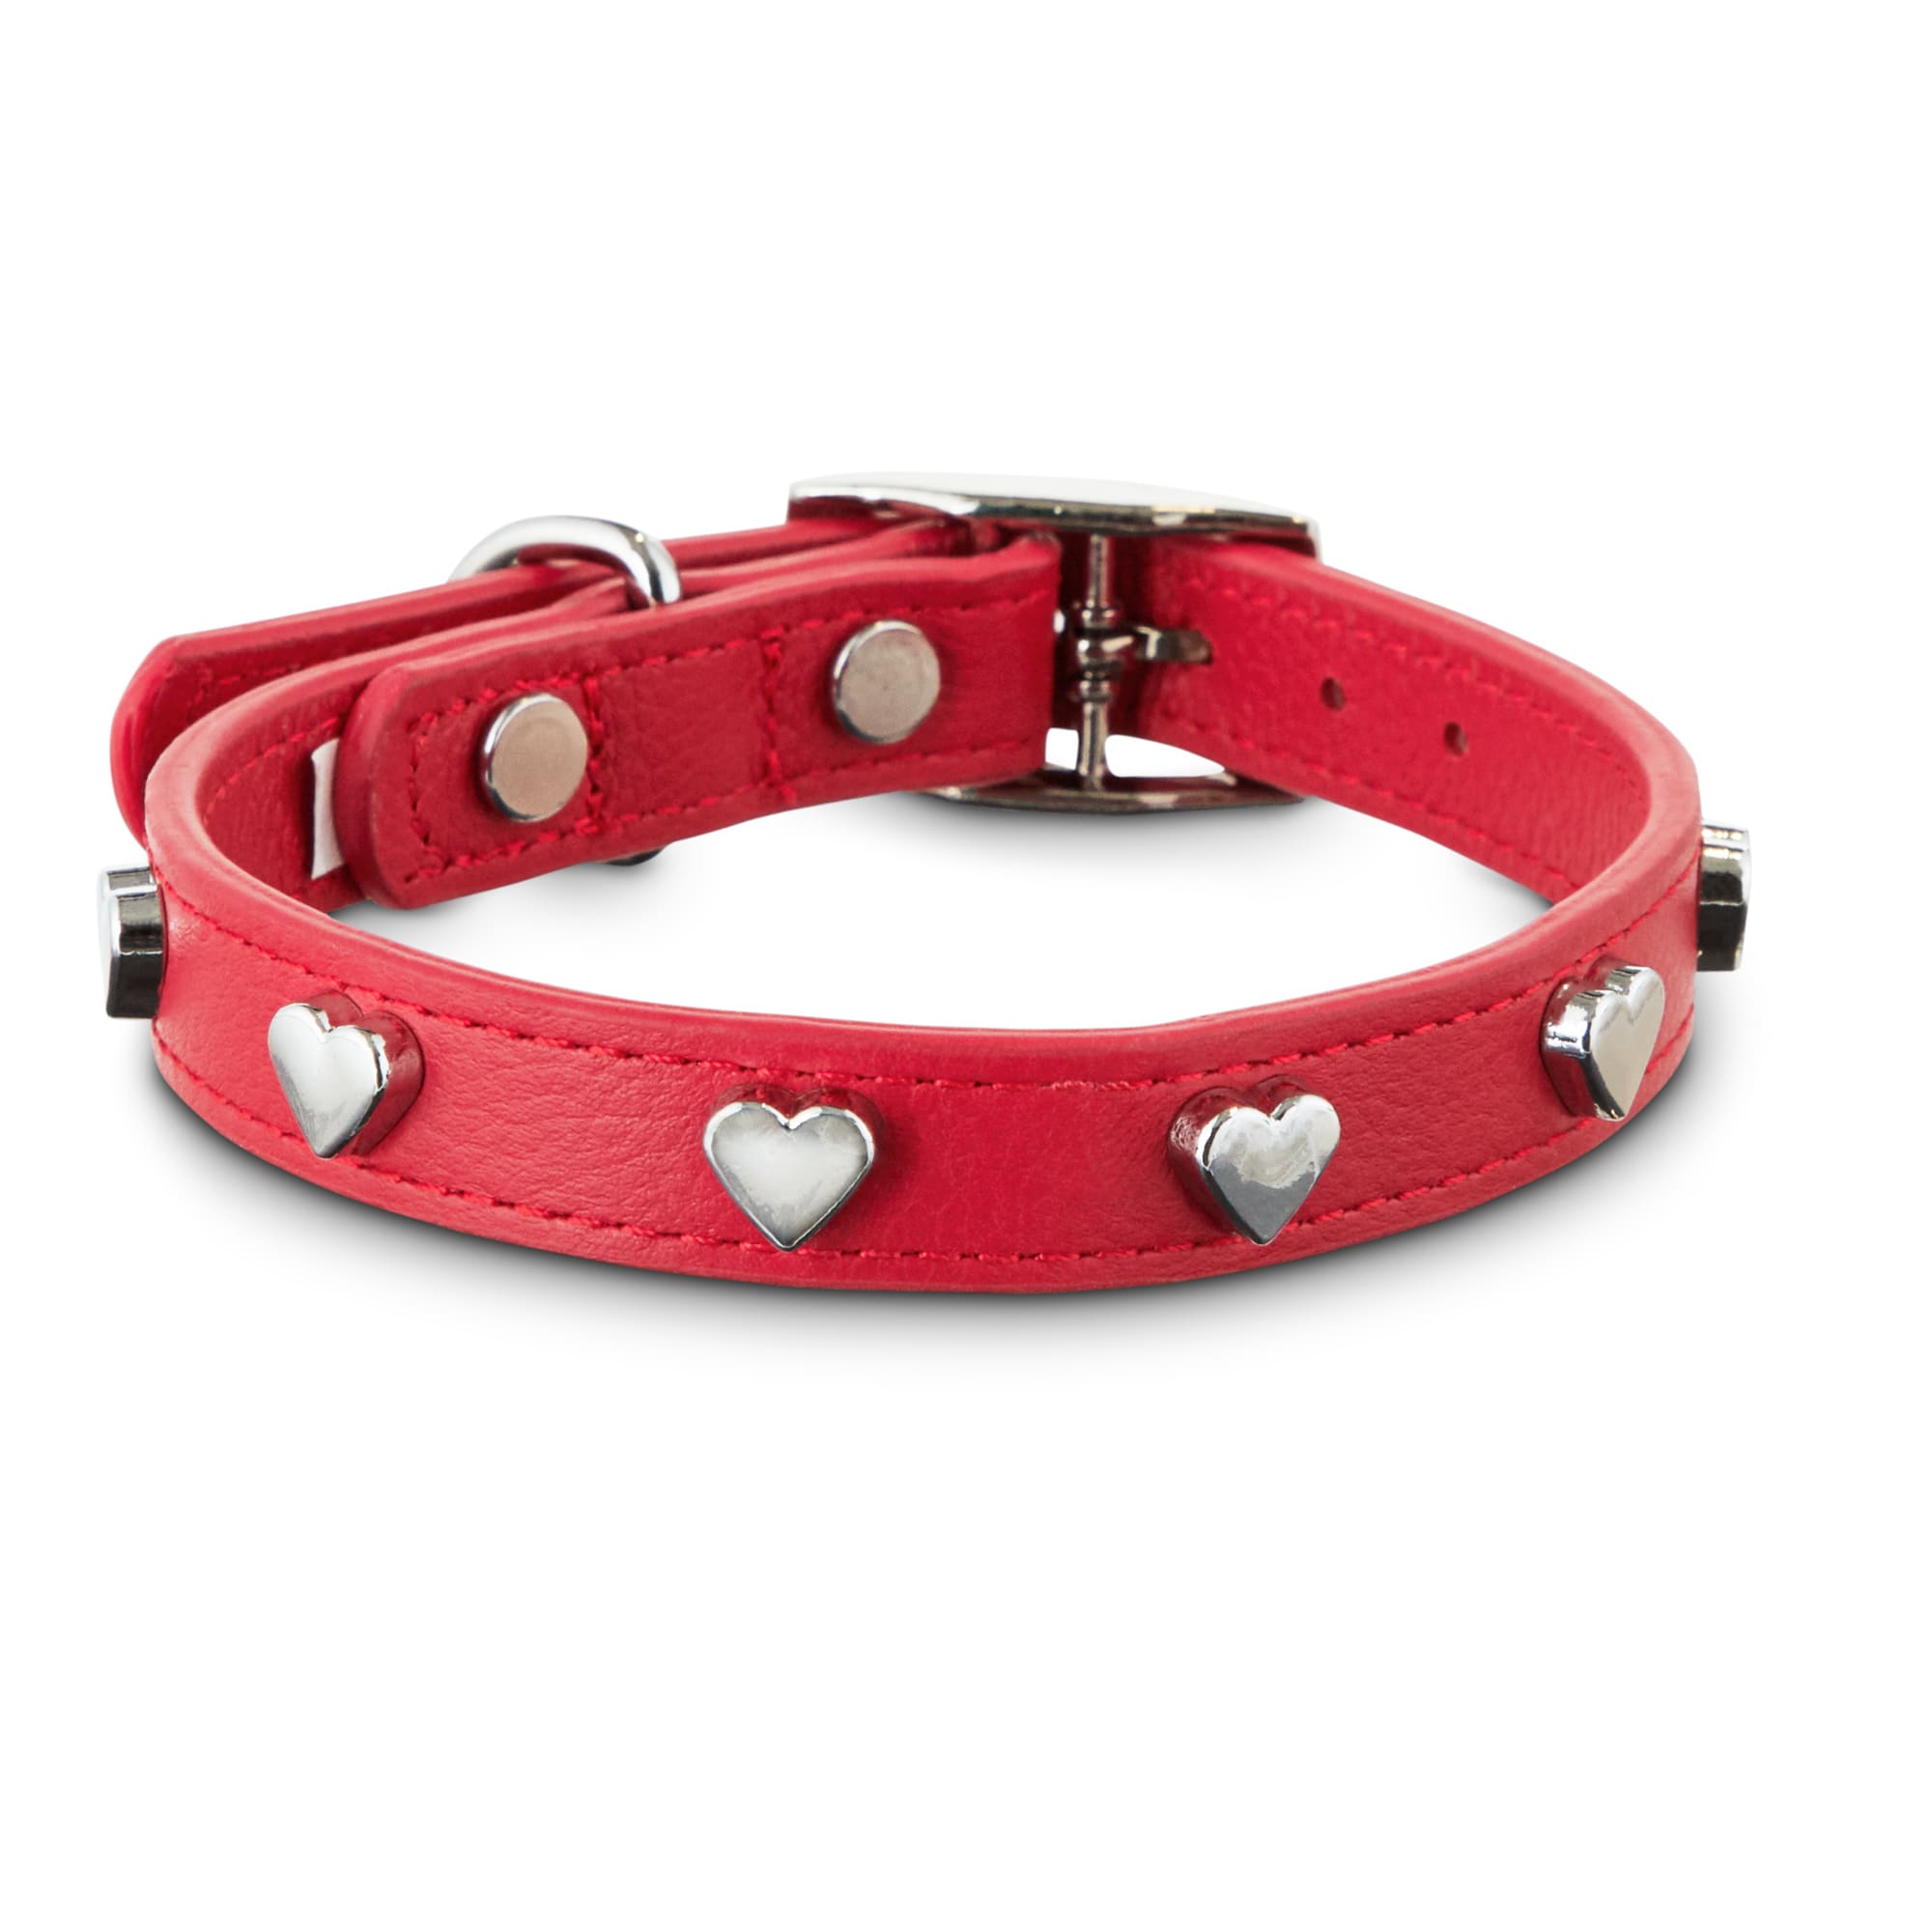 red dog collar and leash